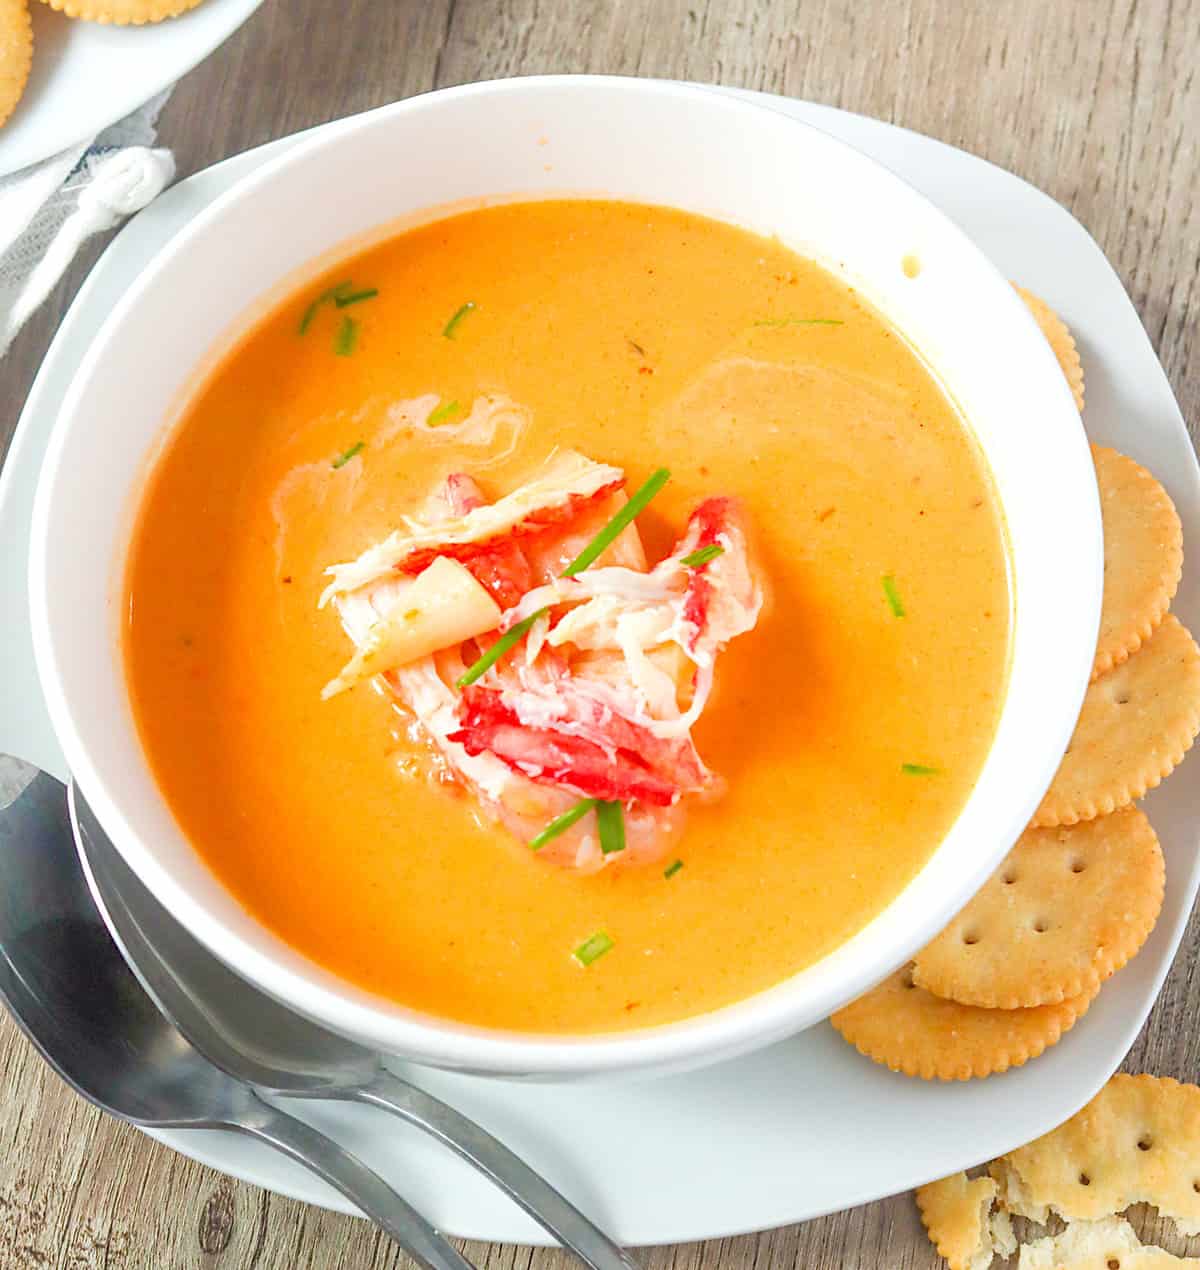 Enjoying a creamy bowl of crab bisque with crackers